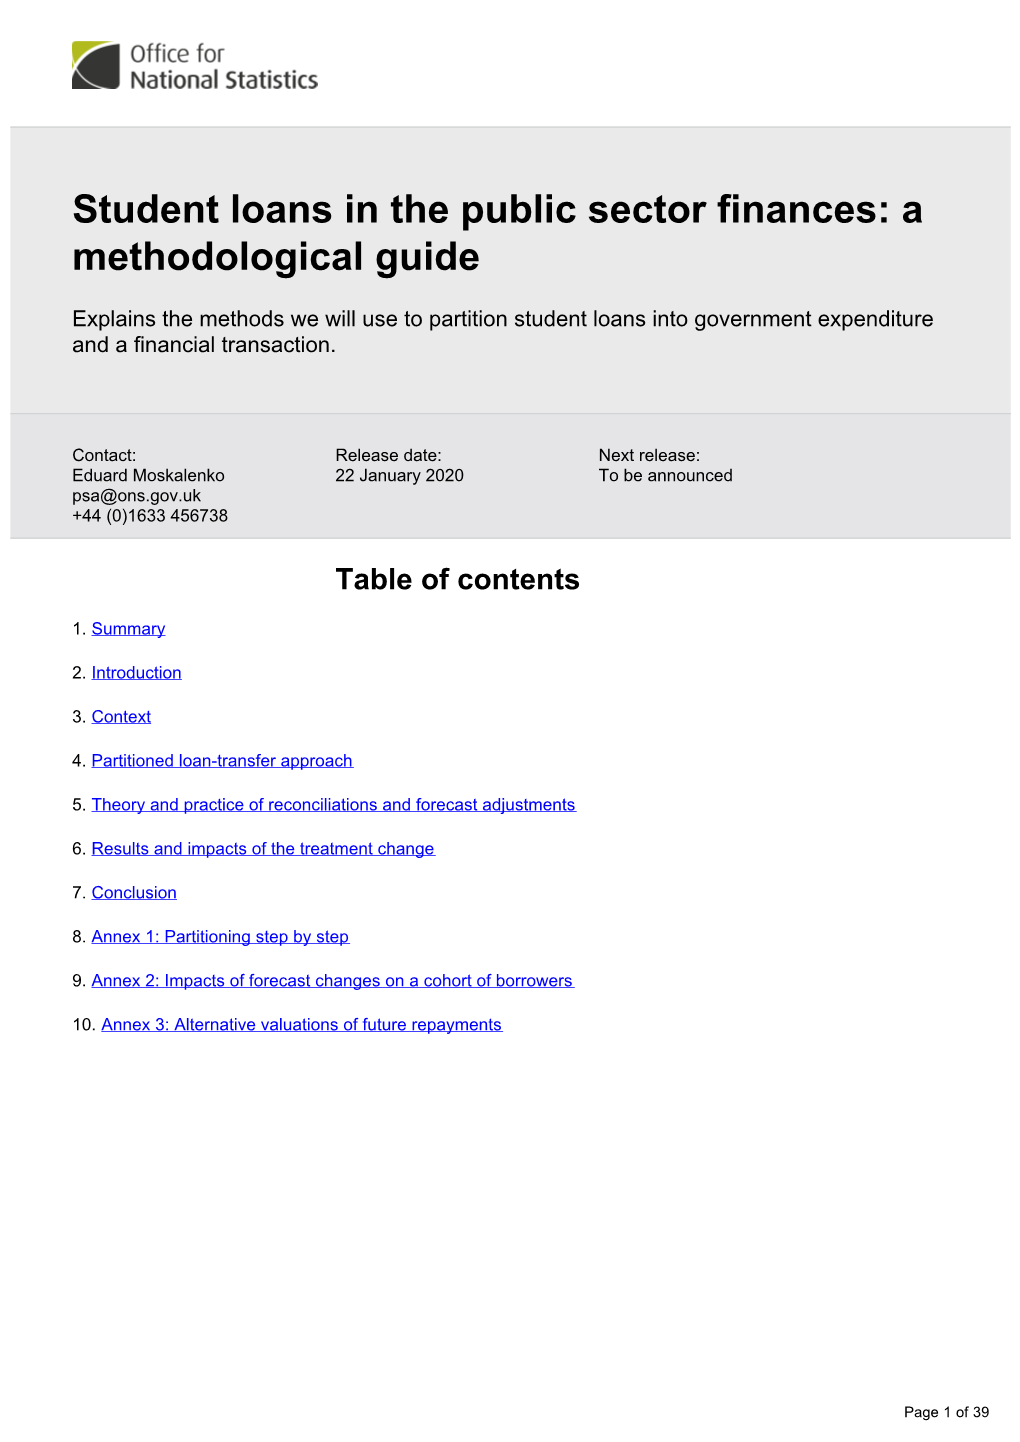 Student Loans in the Public Sector Finances: a Methodological Guide